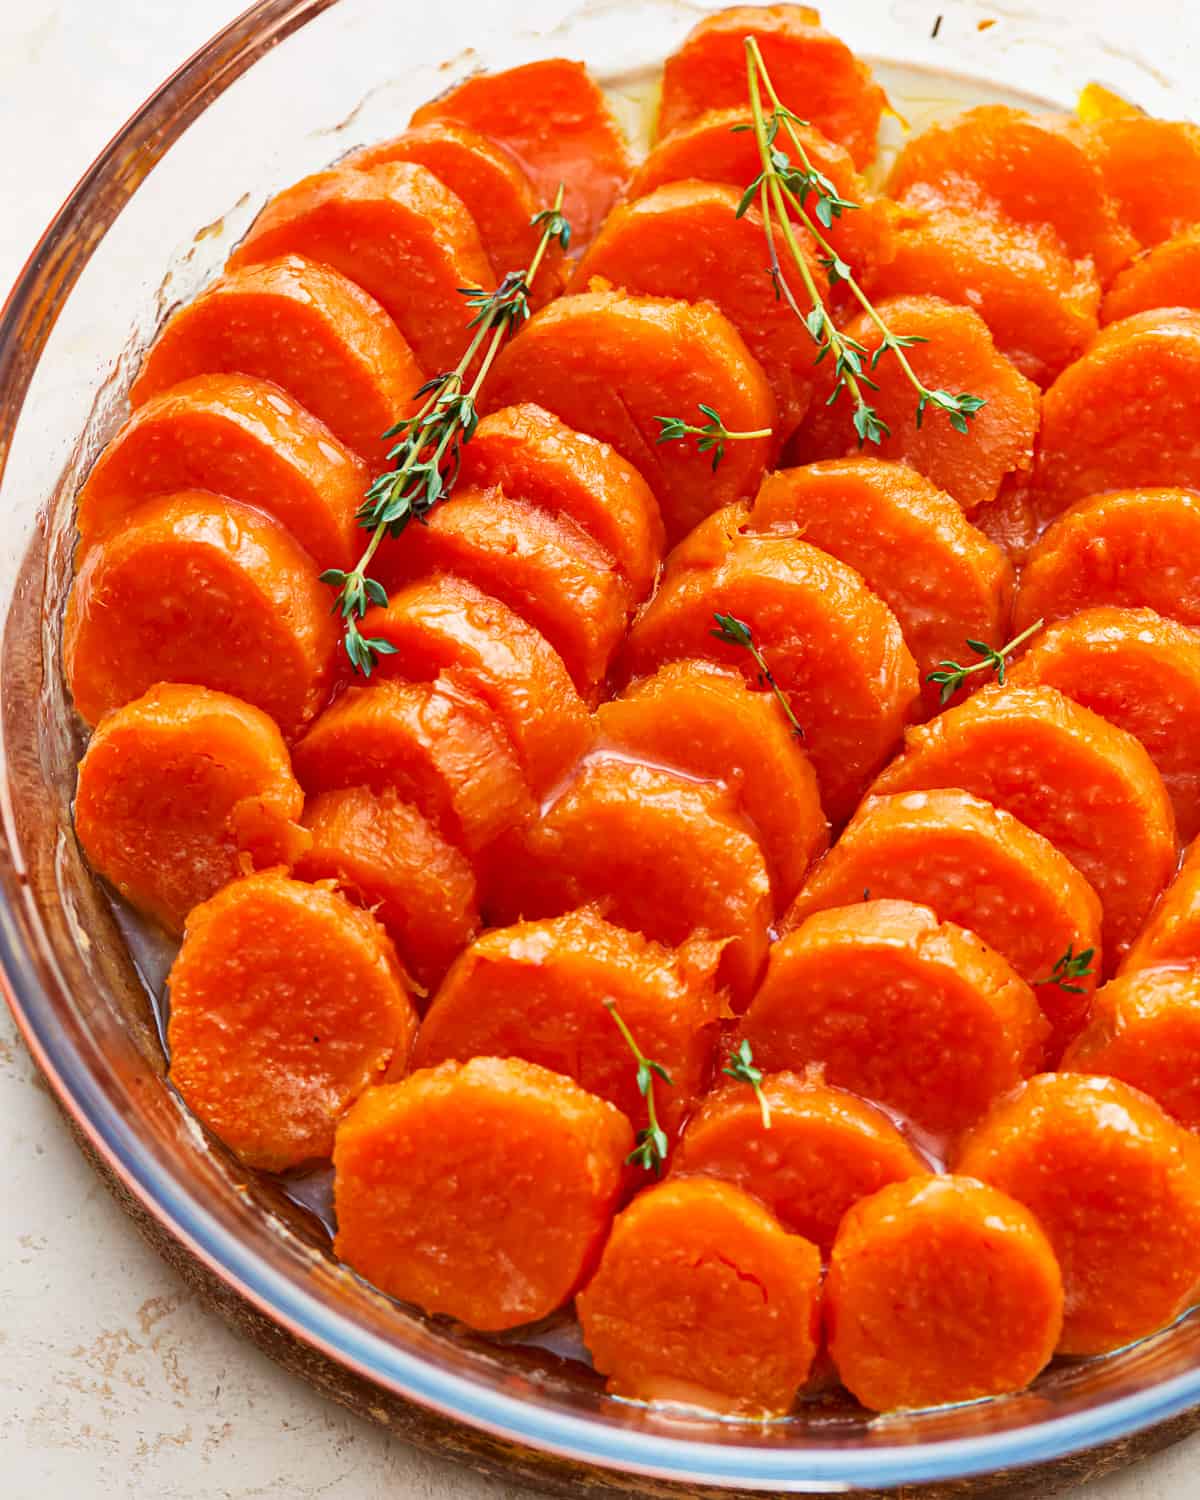 A glass dish with candied sweet potatoes in it.